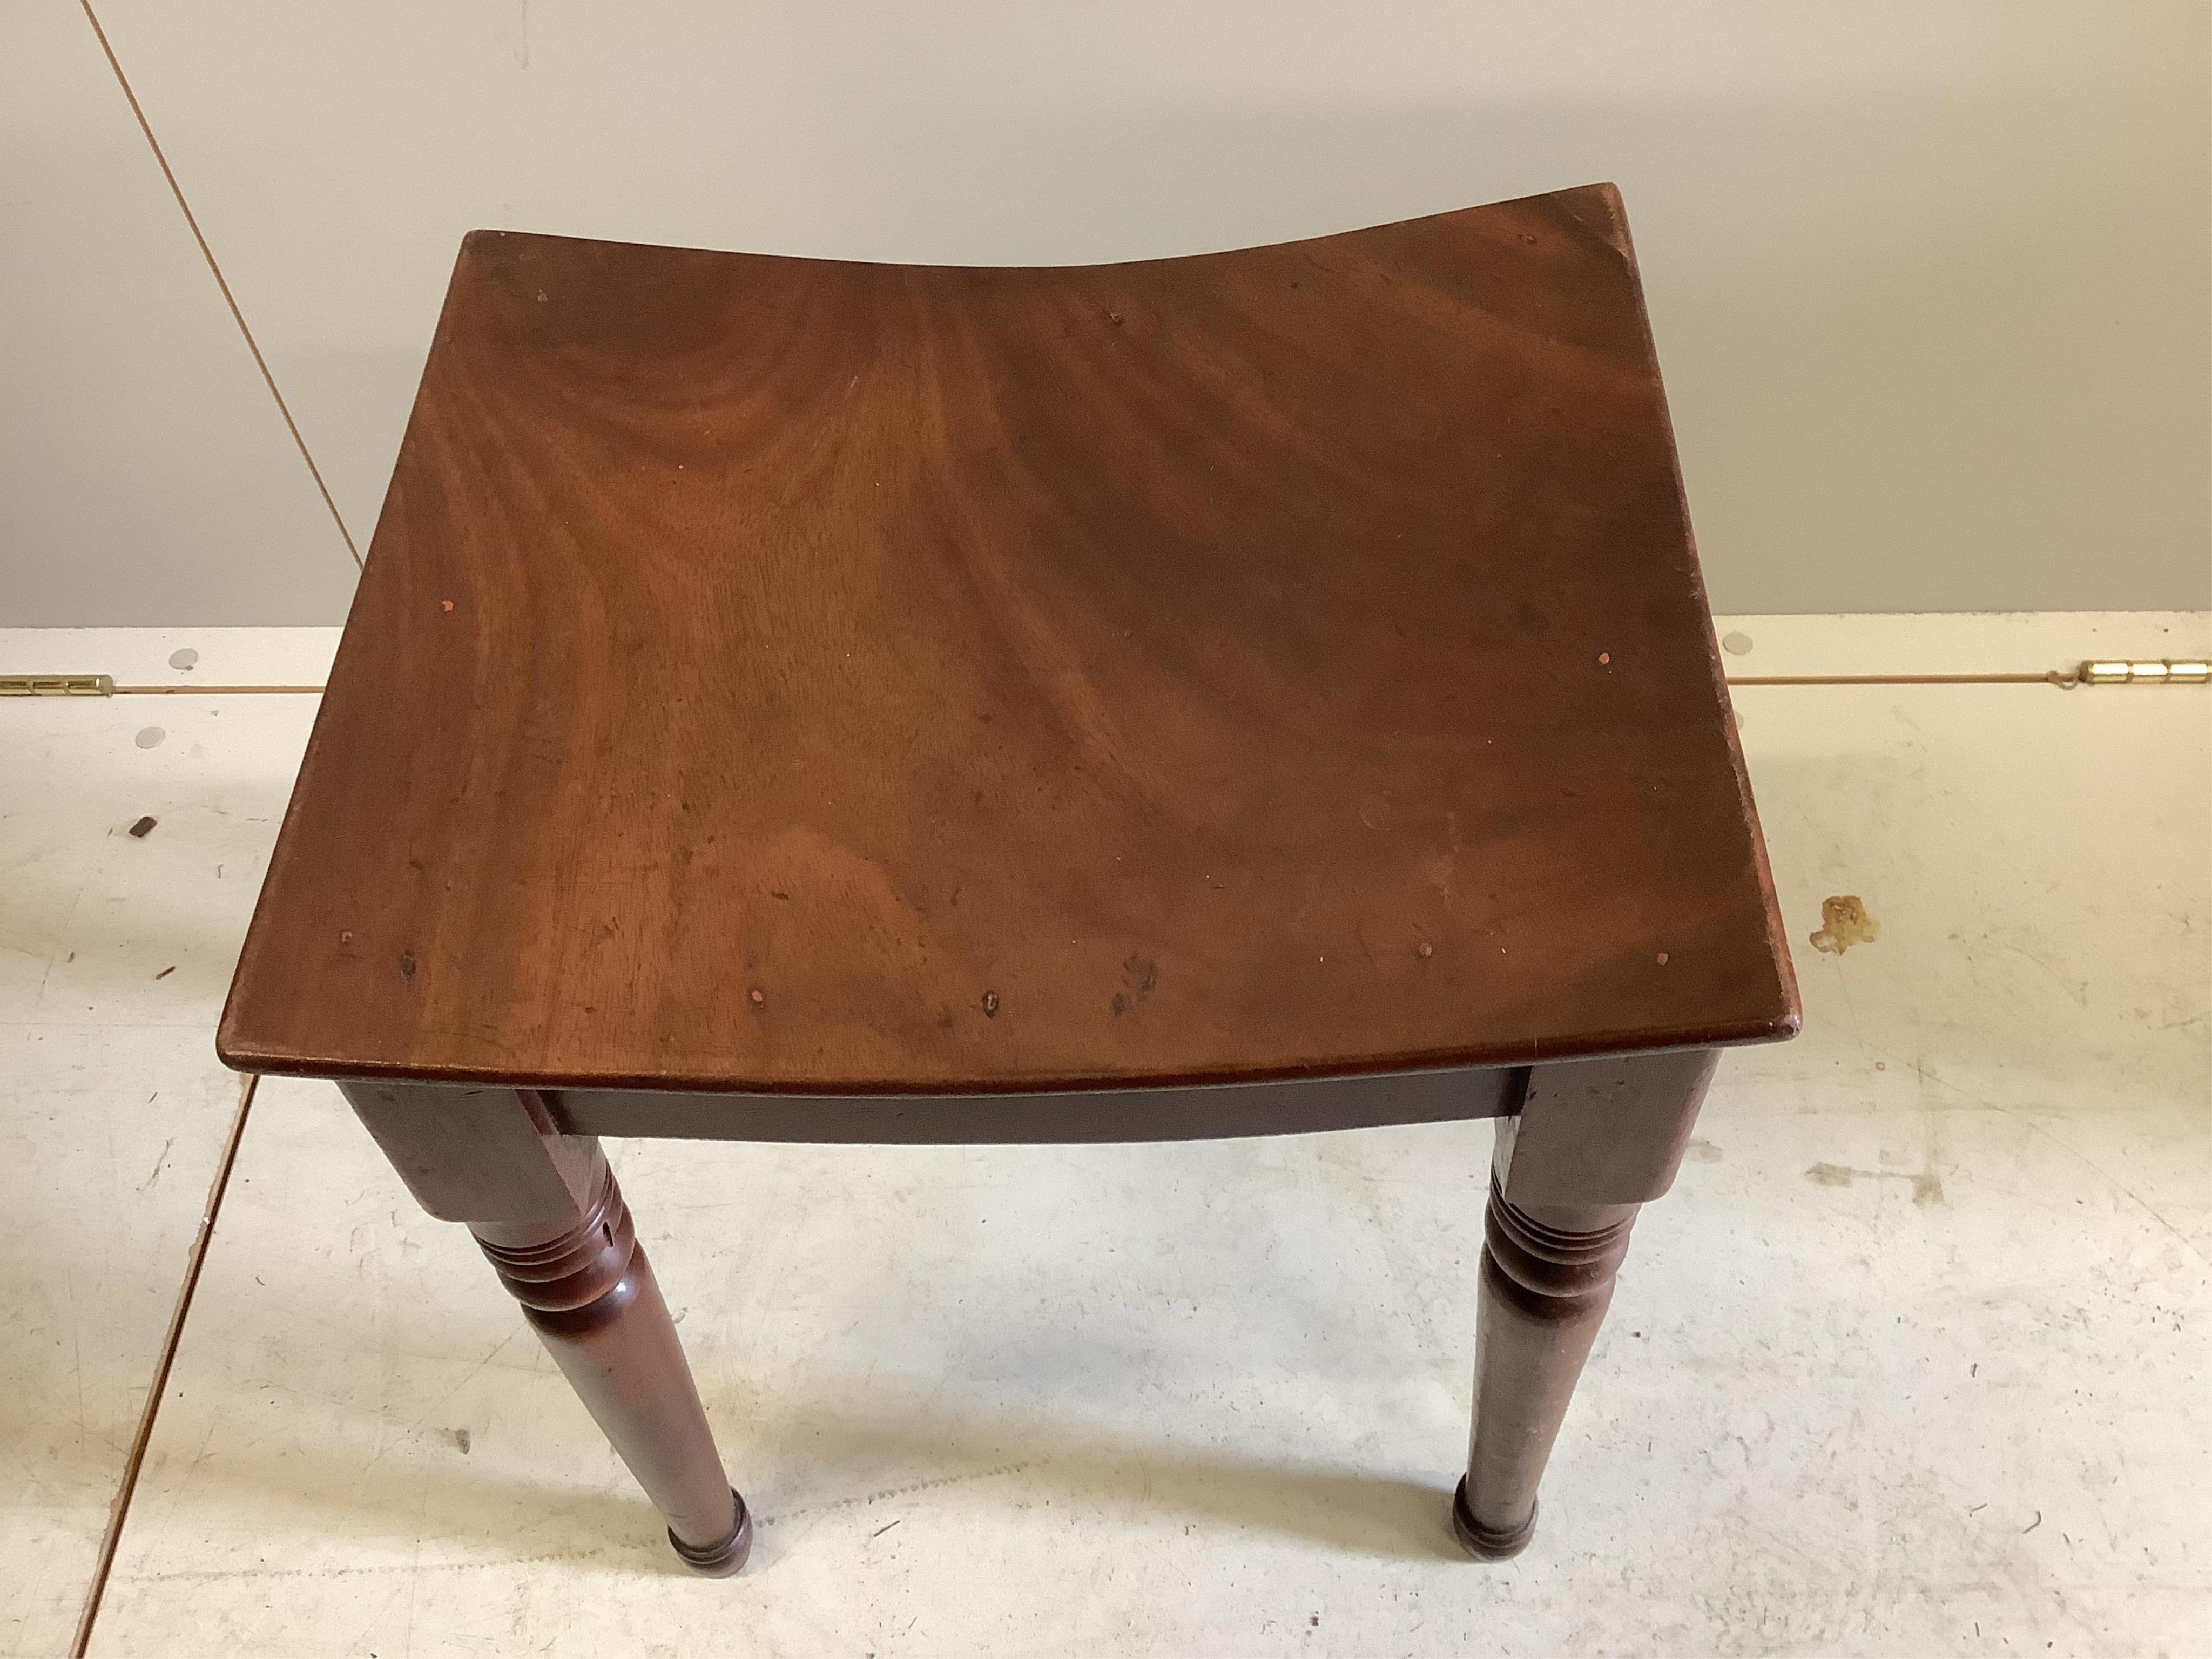 A Regency mahogany stool with curved seat, stamped Gillows, width 36cm, depth 36cm, height 48cm